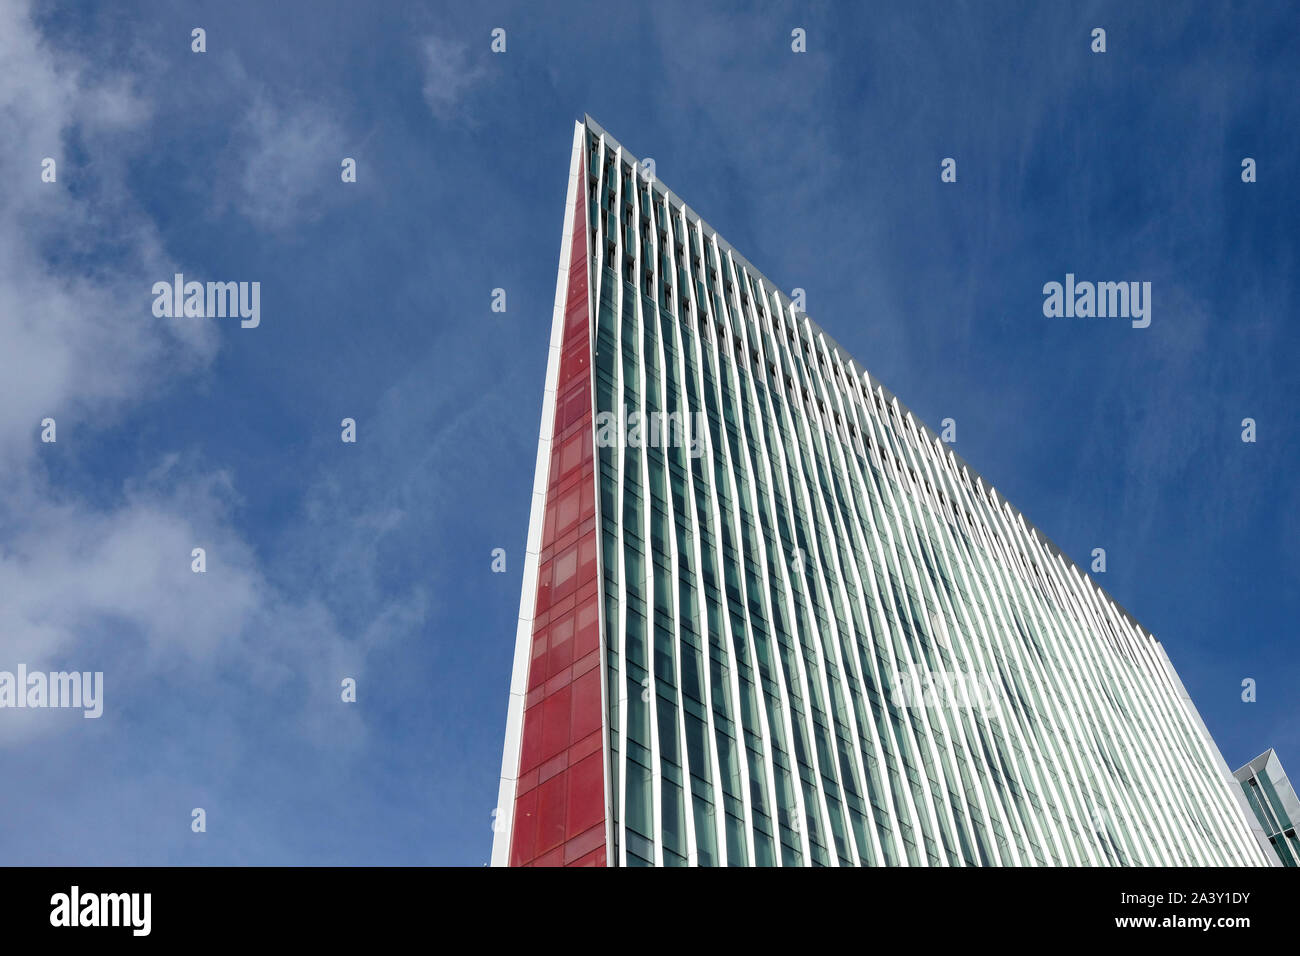 A close up view of the Nova building in Victoria, London, UK Stock Photo